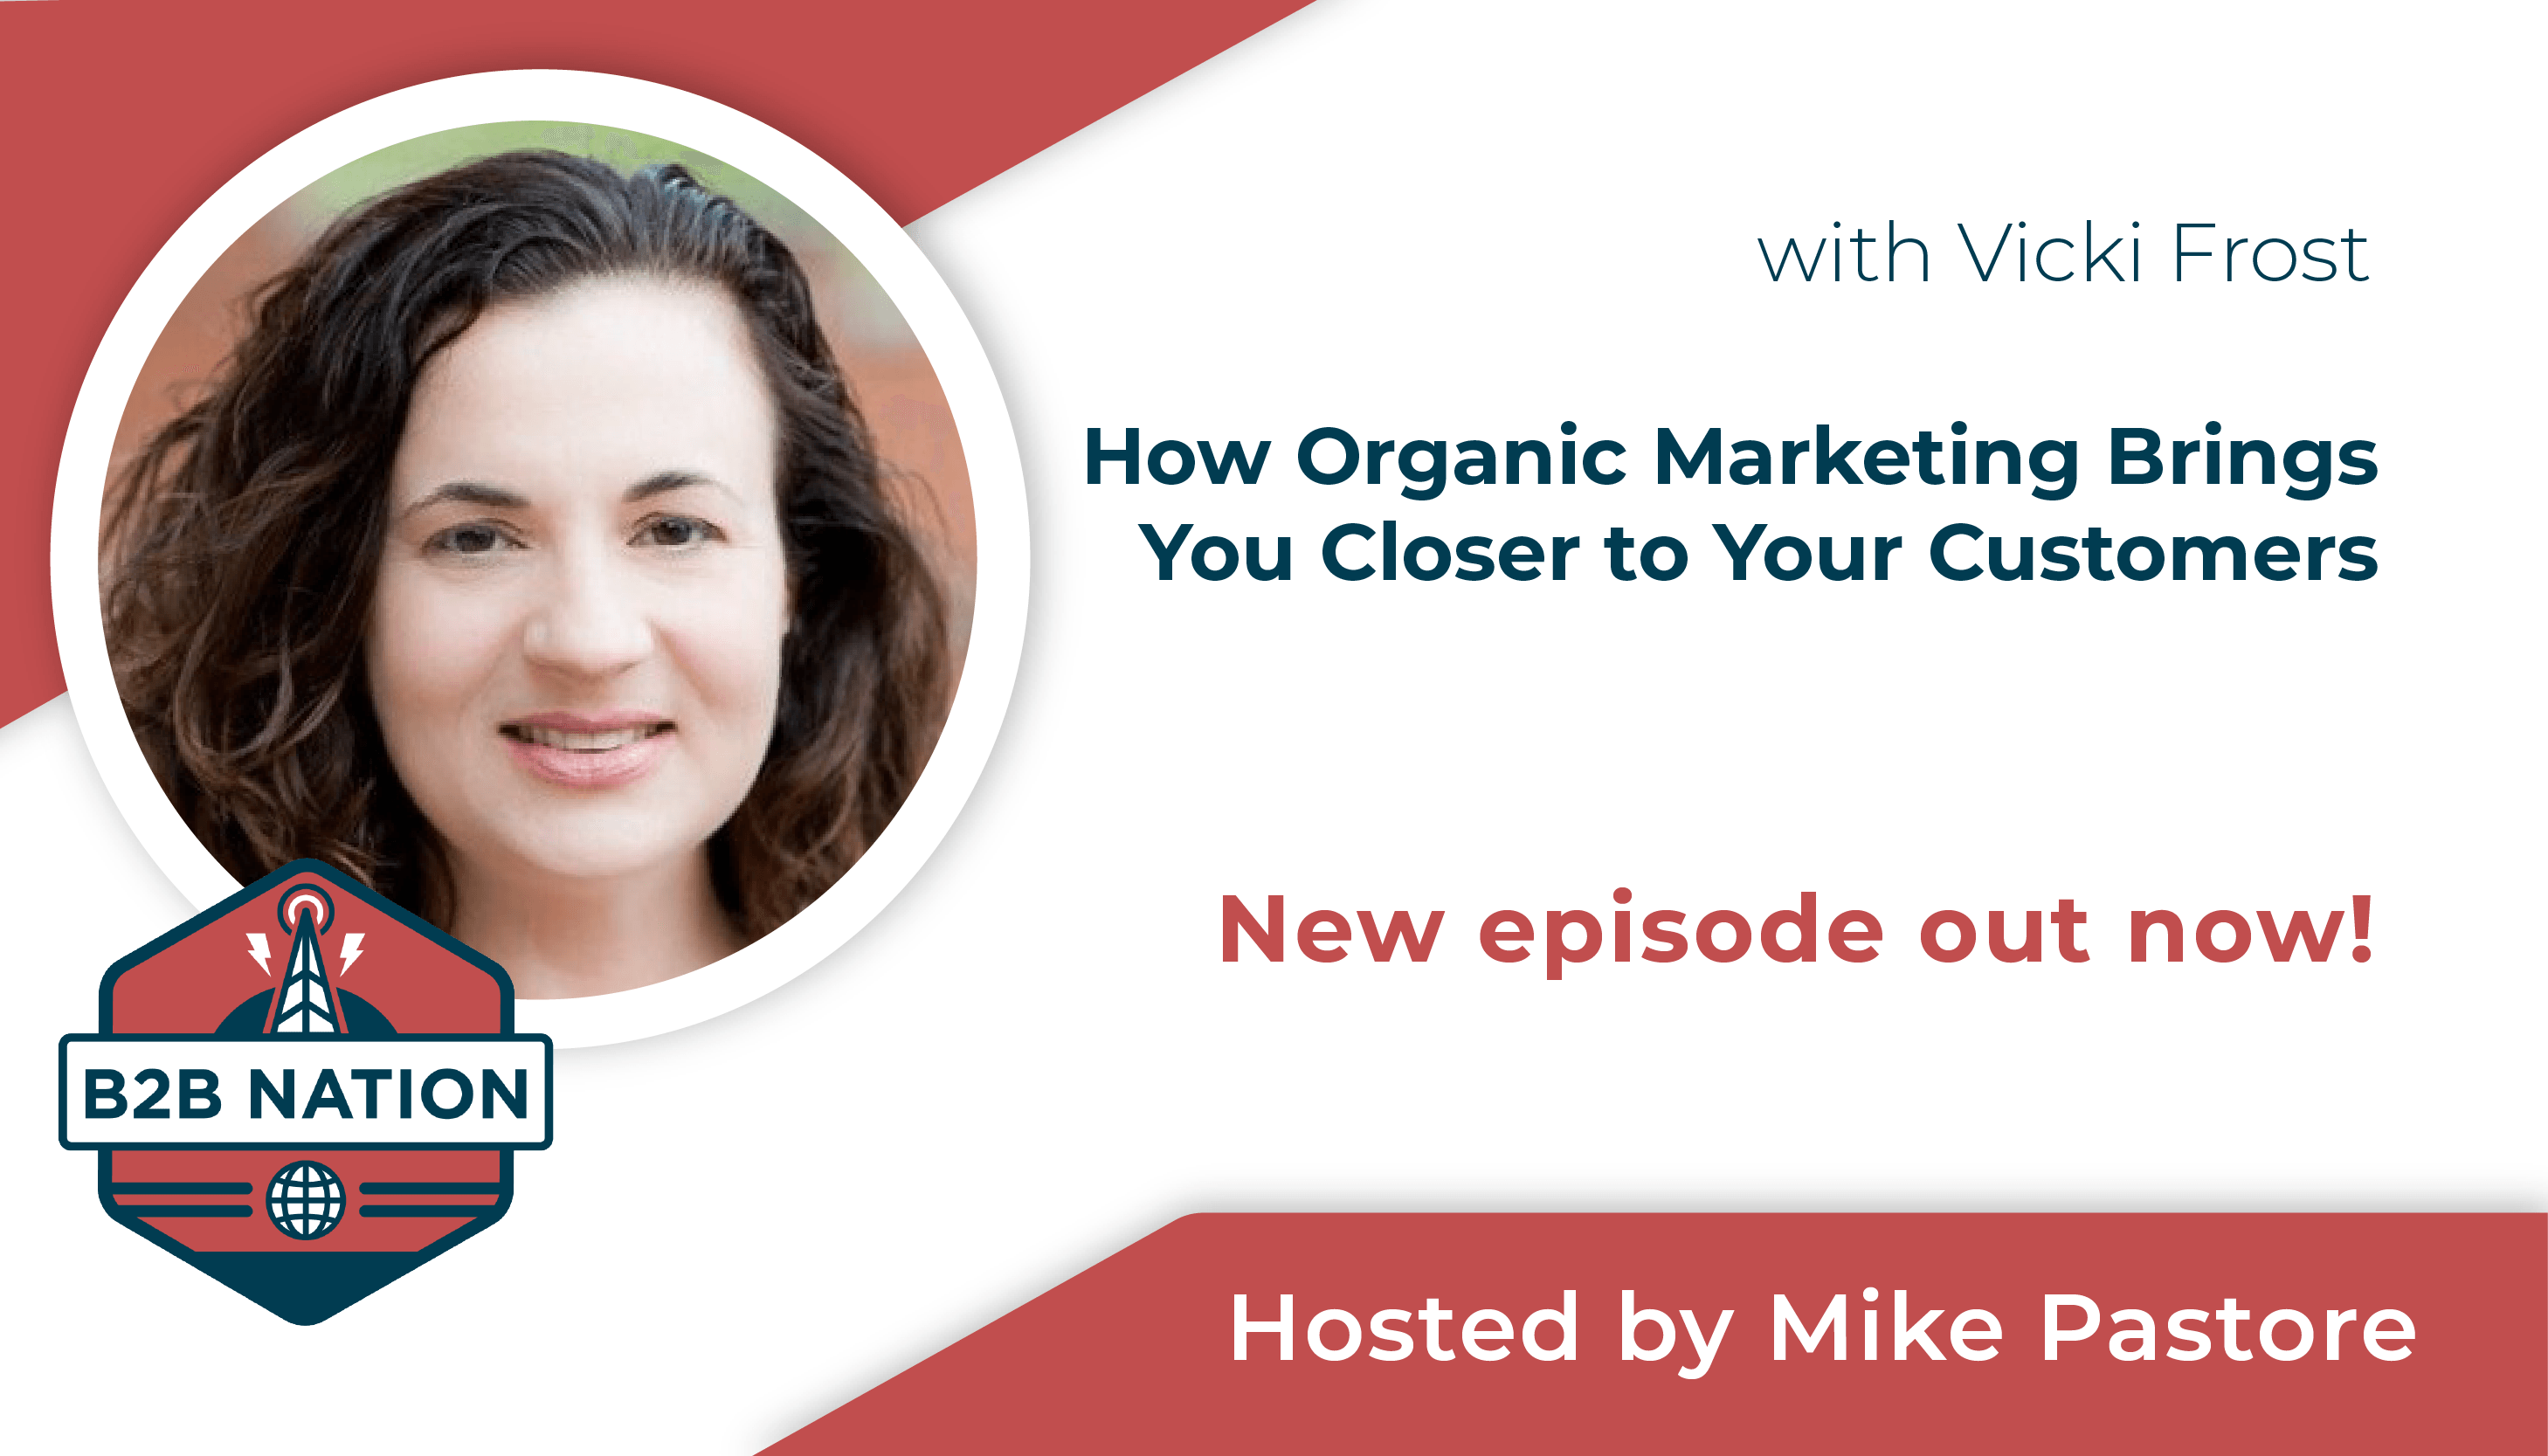 How Organic Marketing Brings You Closer to Your Customers